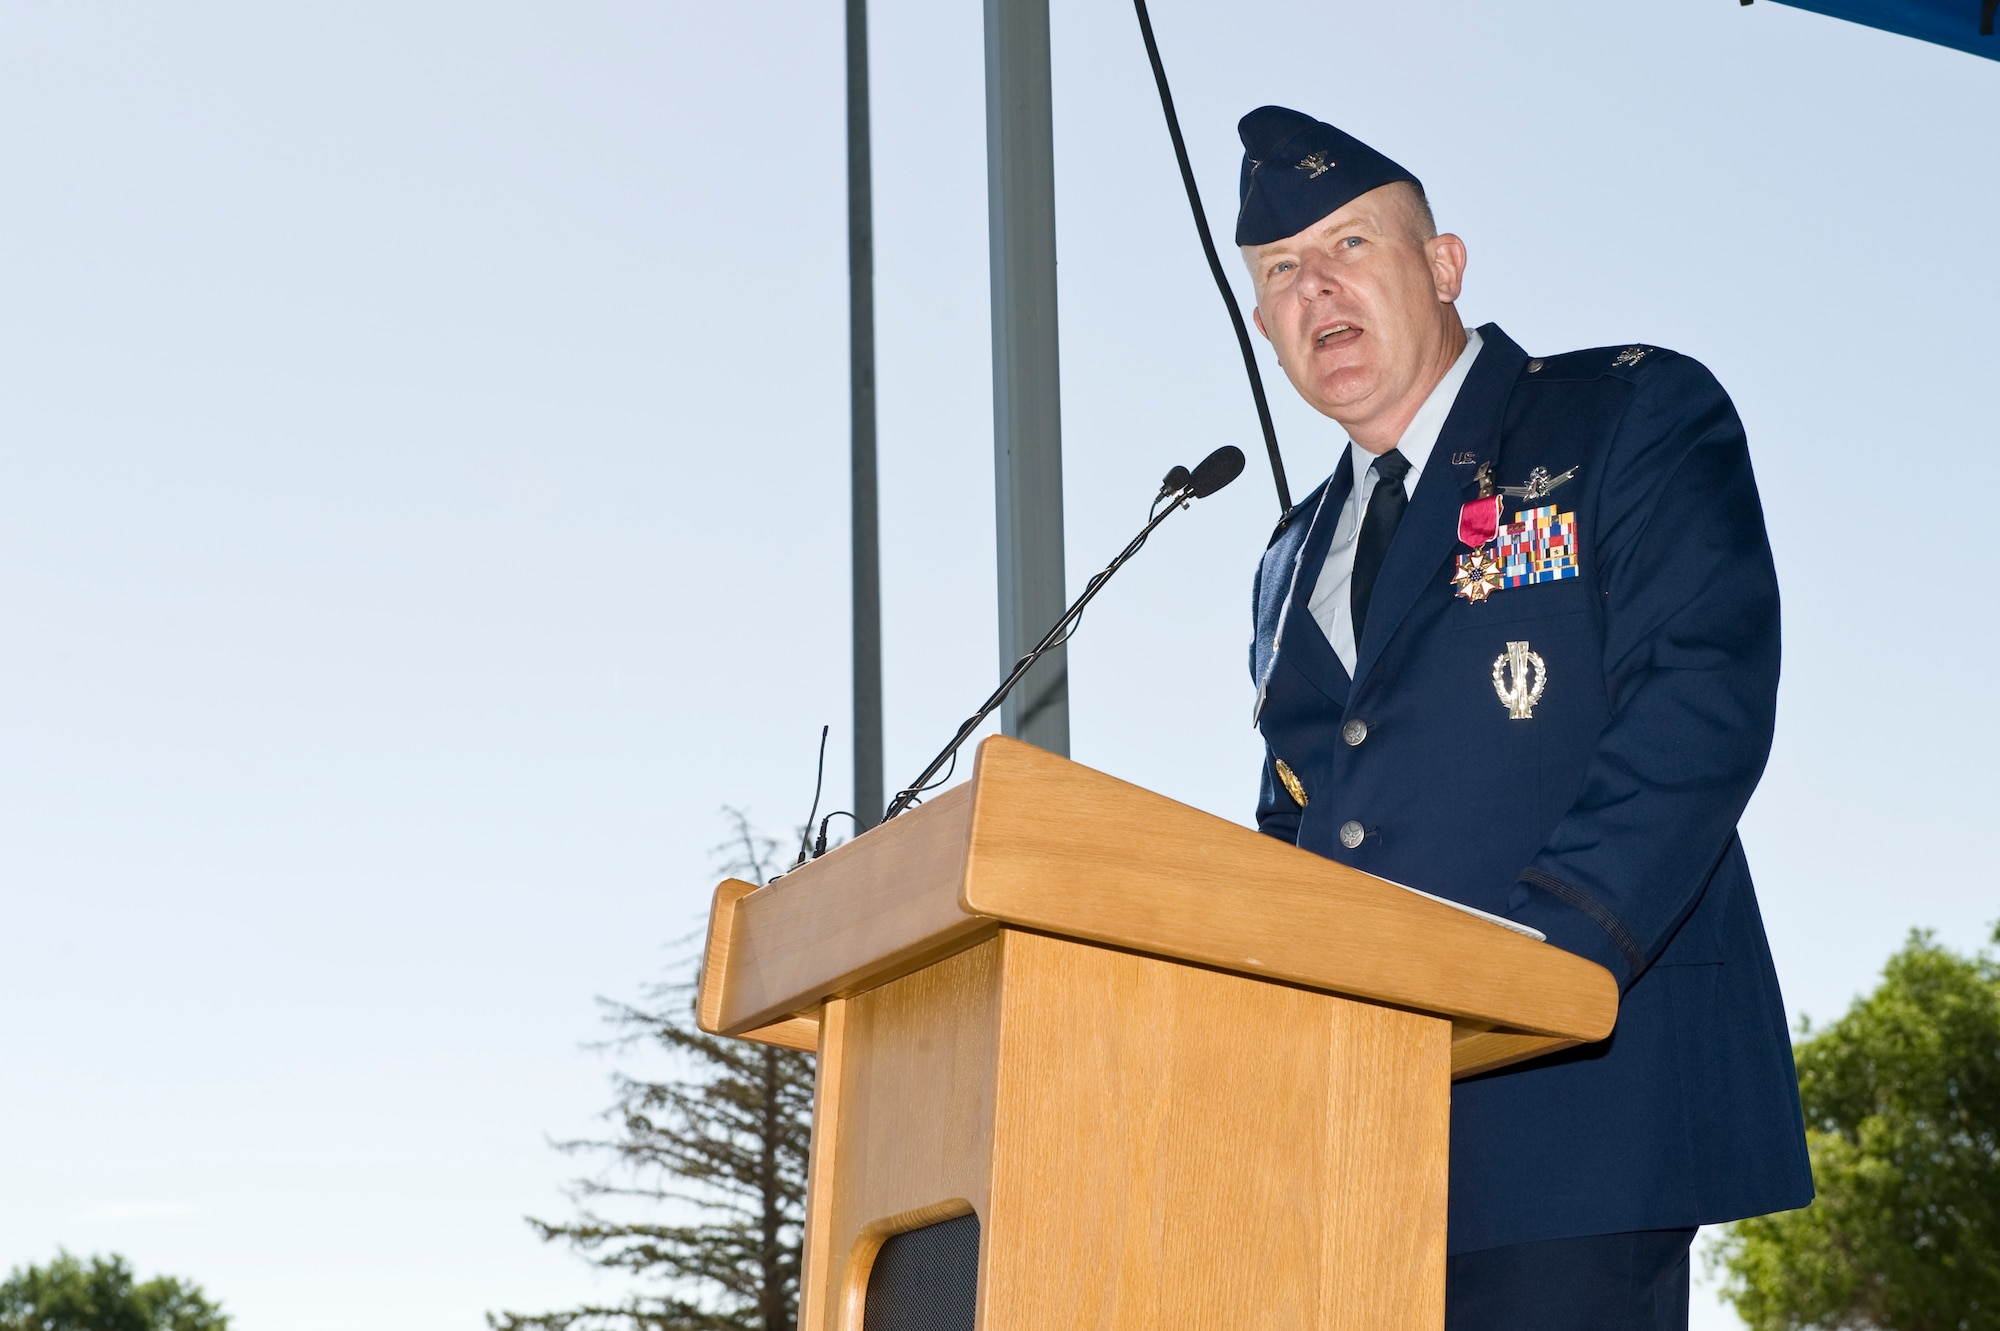 Col. Dan A. Dant, former 460th Space Wing commander, says goodbye to members of 460th SW June 28, 2013, during the 460th SW change of command ceremony on Buckley Air Force Base, Colo. During his speech, Dant said he honored his time with the men and women of the 460th SW, thanking them for their hard work to make Buckley the premier base in Air Force Space Command. (U.S. Air Force photo by Senior Airman Phillip Houk/Released)